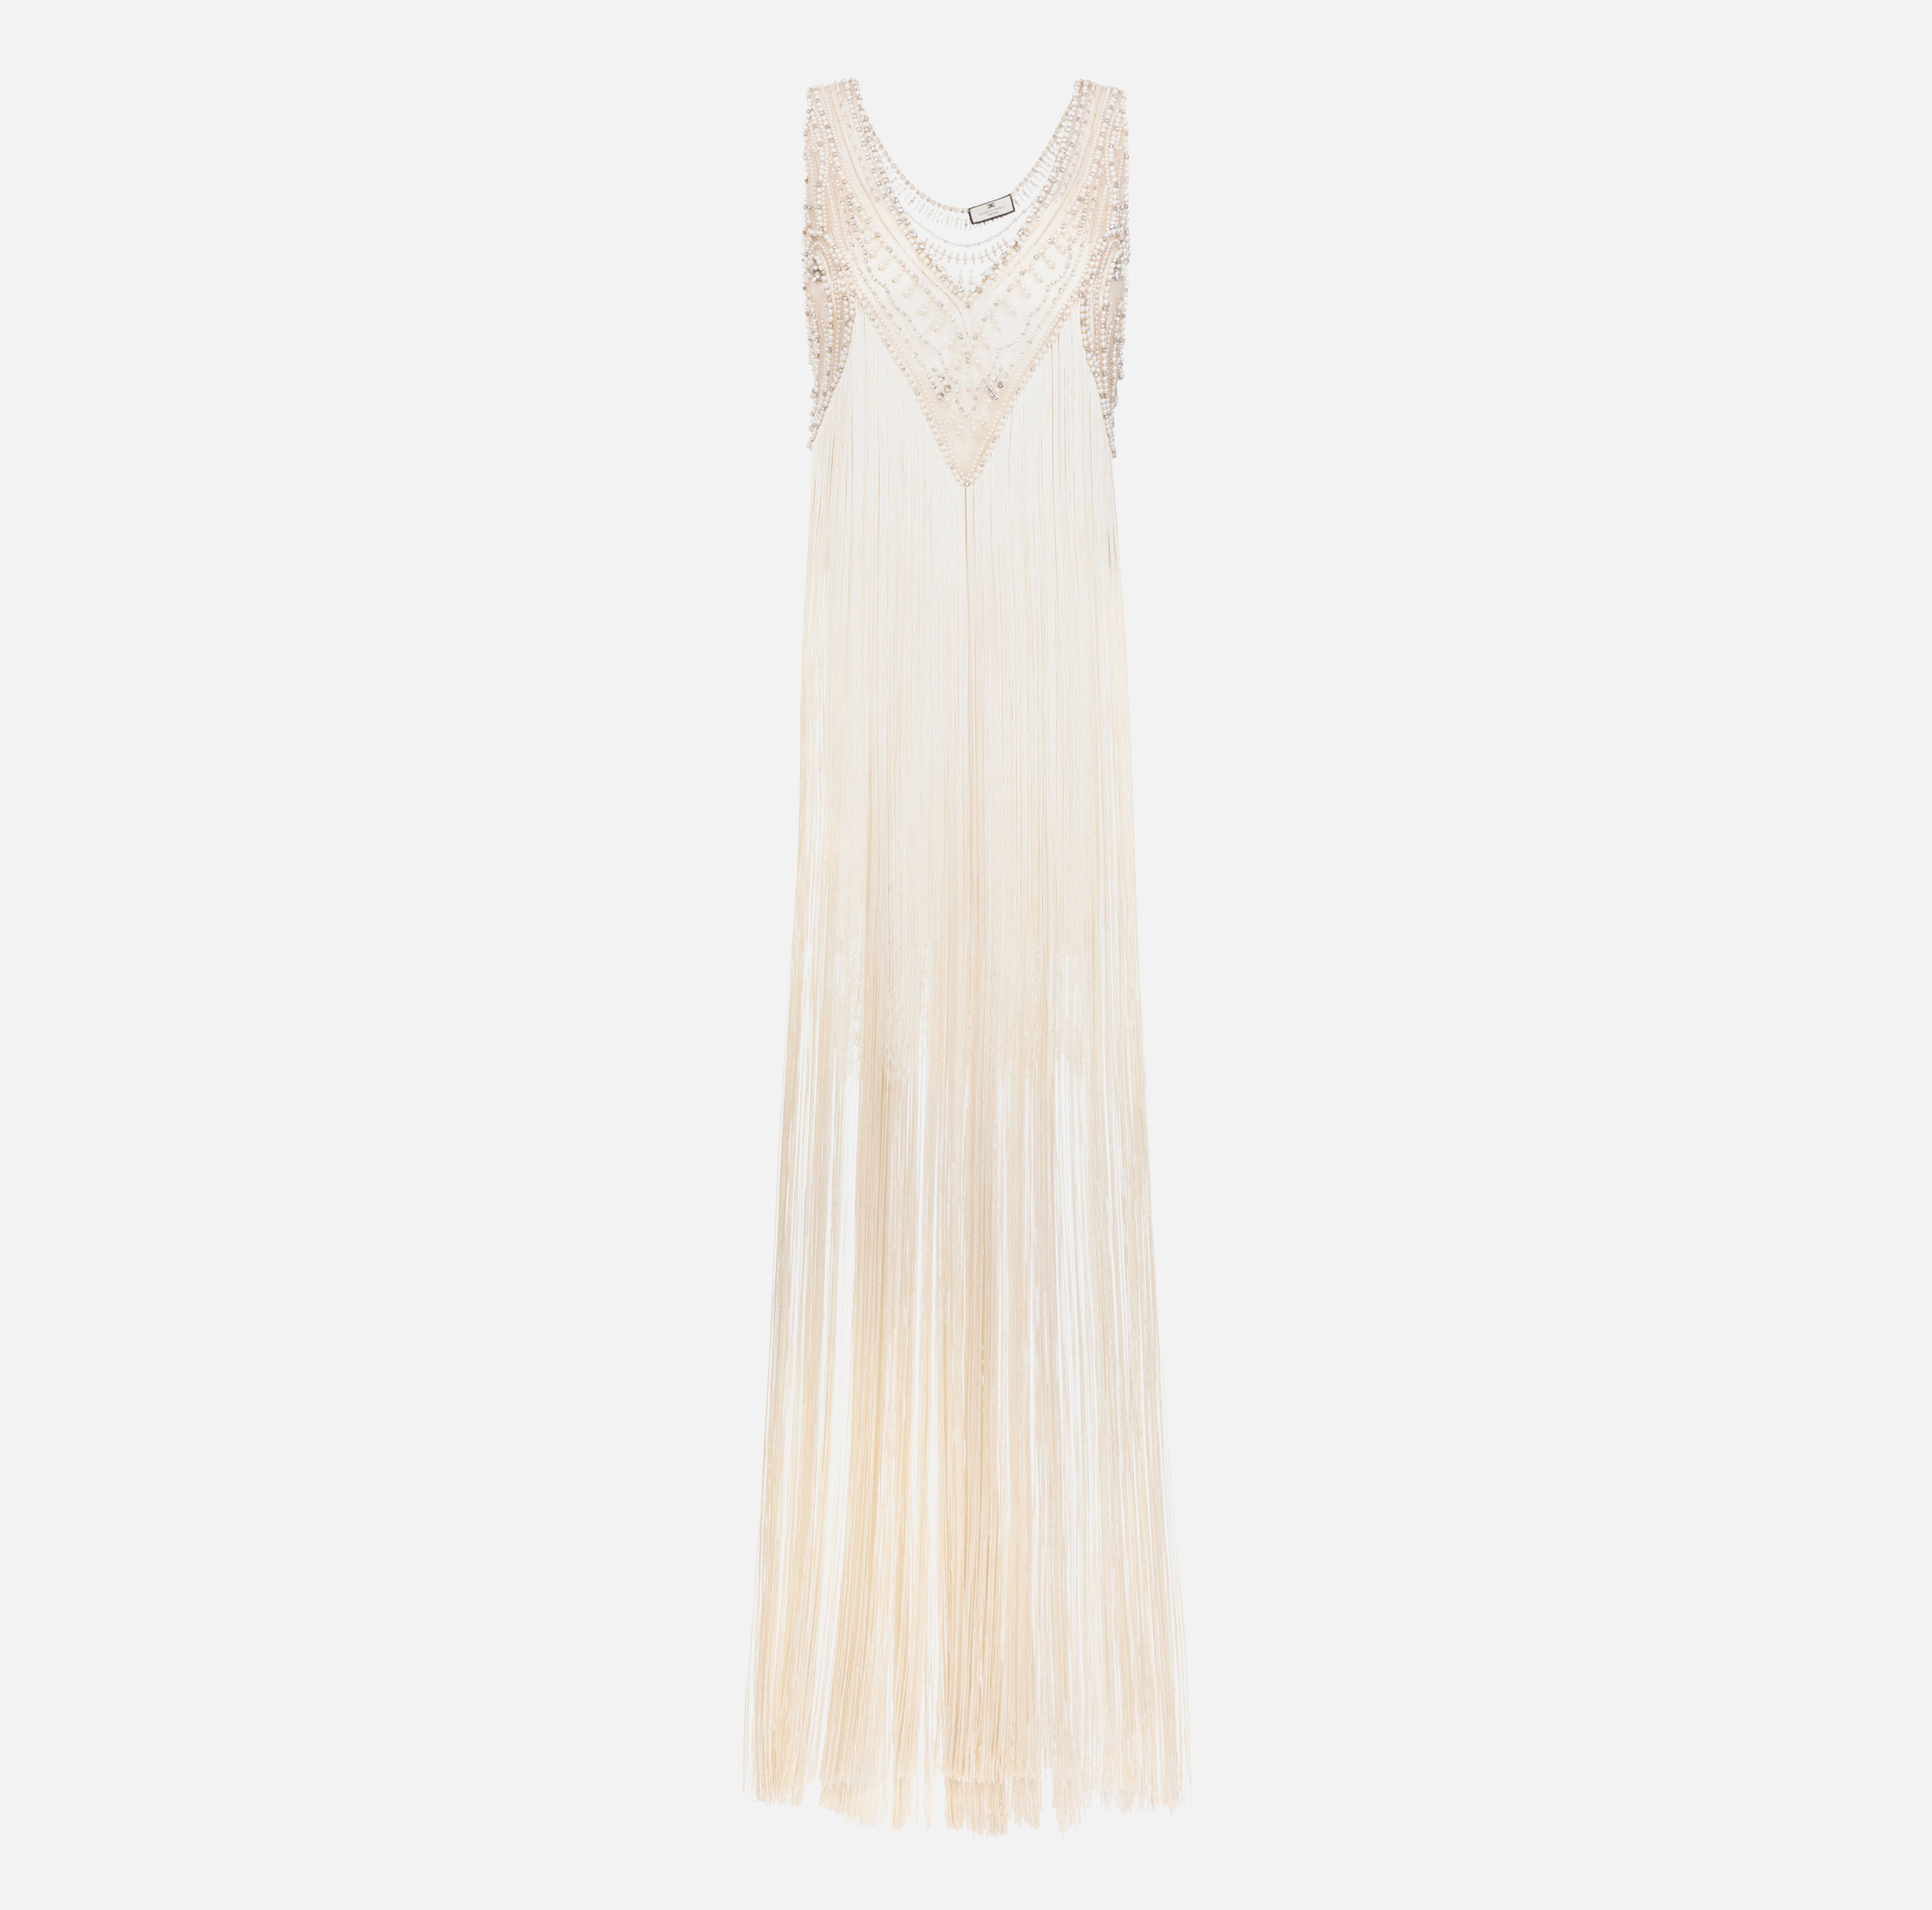 Tulle Red Carpet dress with fringes and beads - Elisabetta Franchi